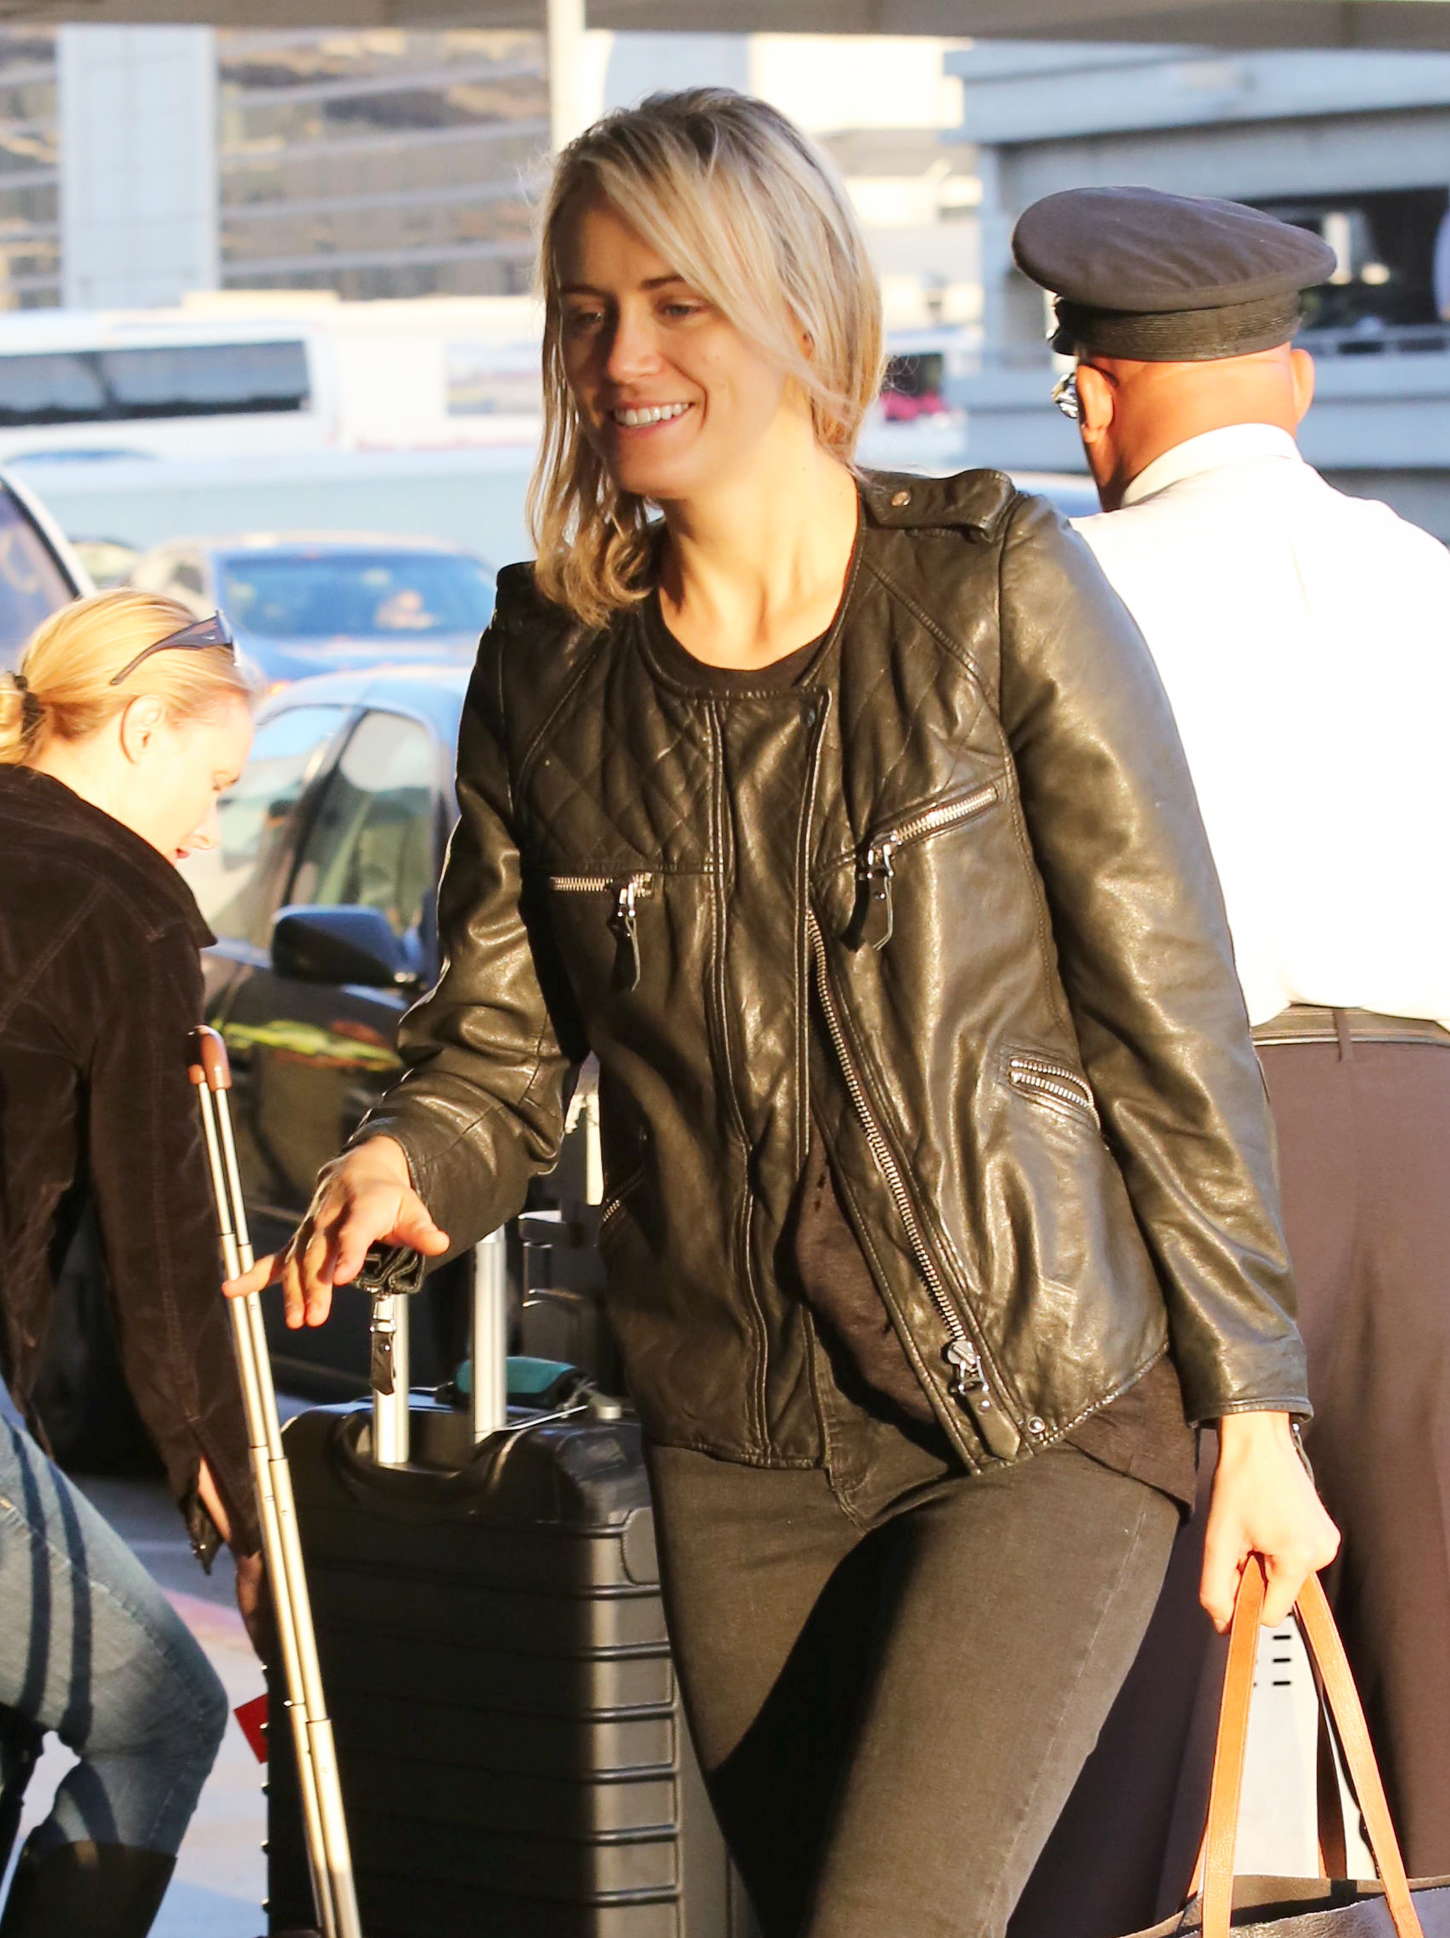 Taylor Schilling in Tight Pants at LAX Airport